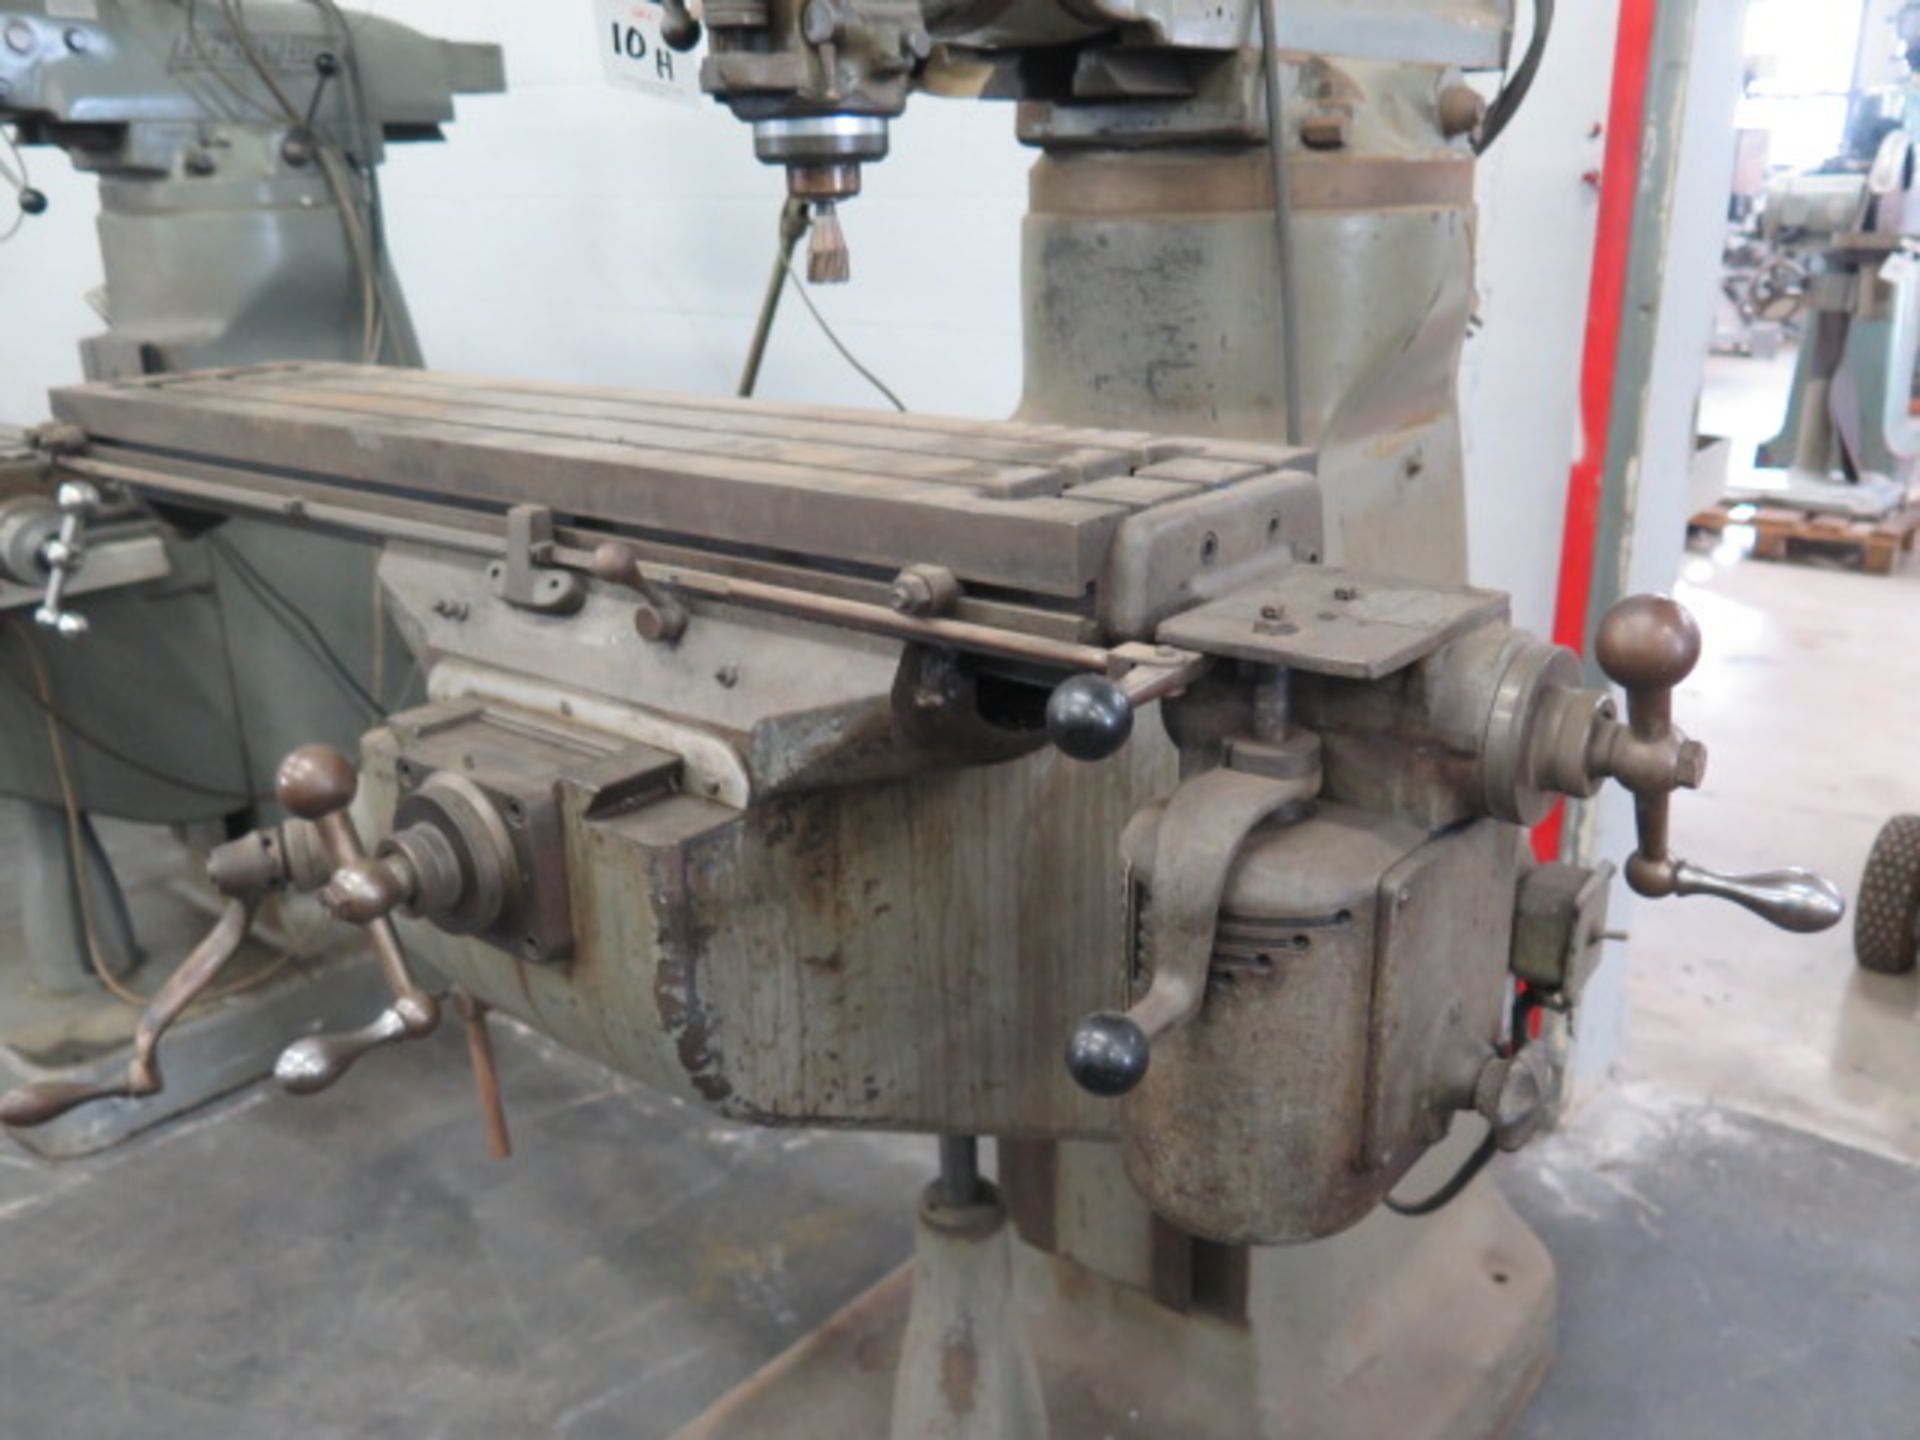 Bridgeport Mill s/n 81175 w/ 1Hp Motor, 80-2720 RPM, 8-Speeds, Power Feed,9" x 42" Table, SOLD AS IS - Image 4 of 7